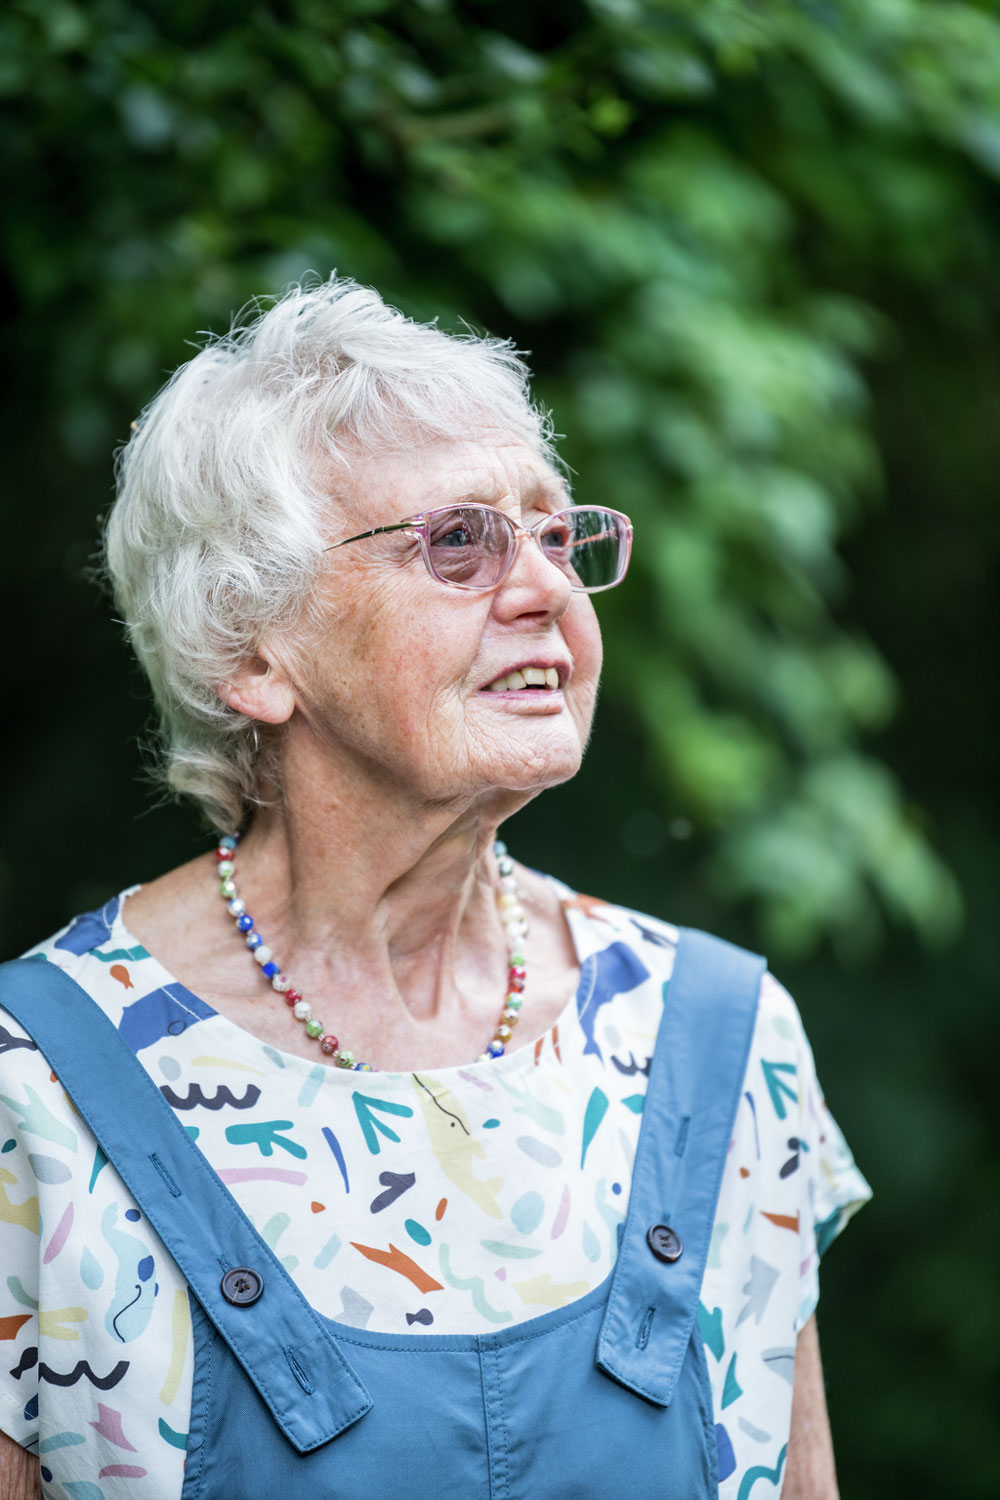 An older woman with grey hair, glasses and dungarees, looking off to the side